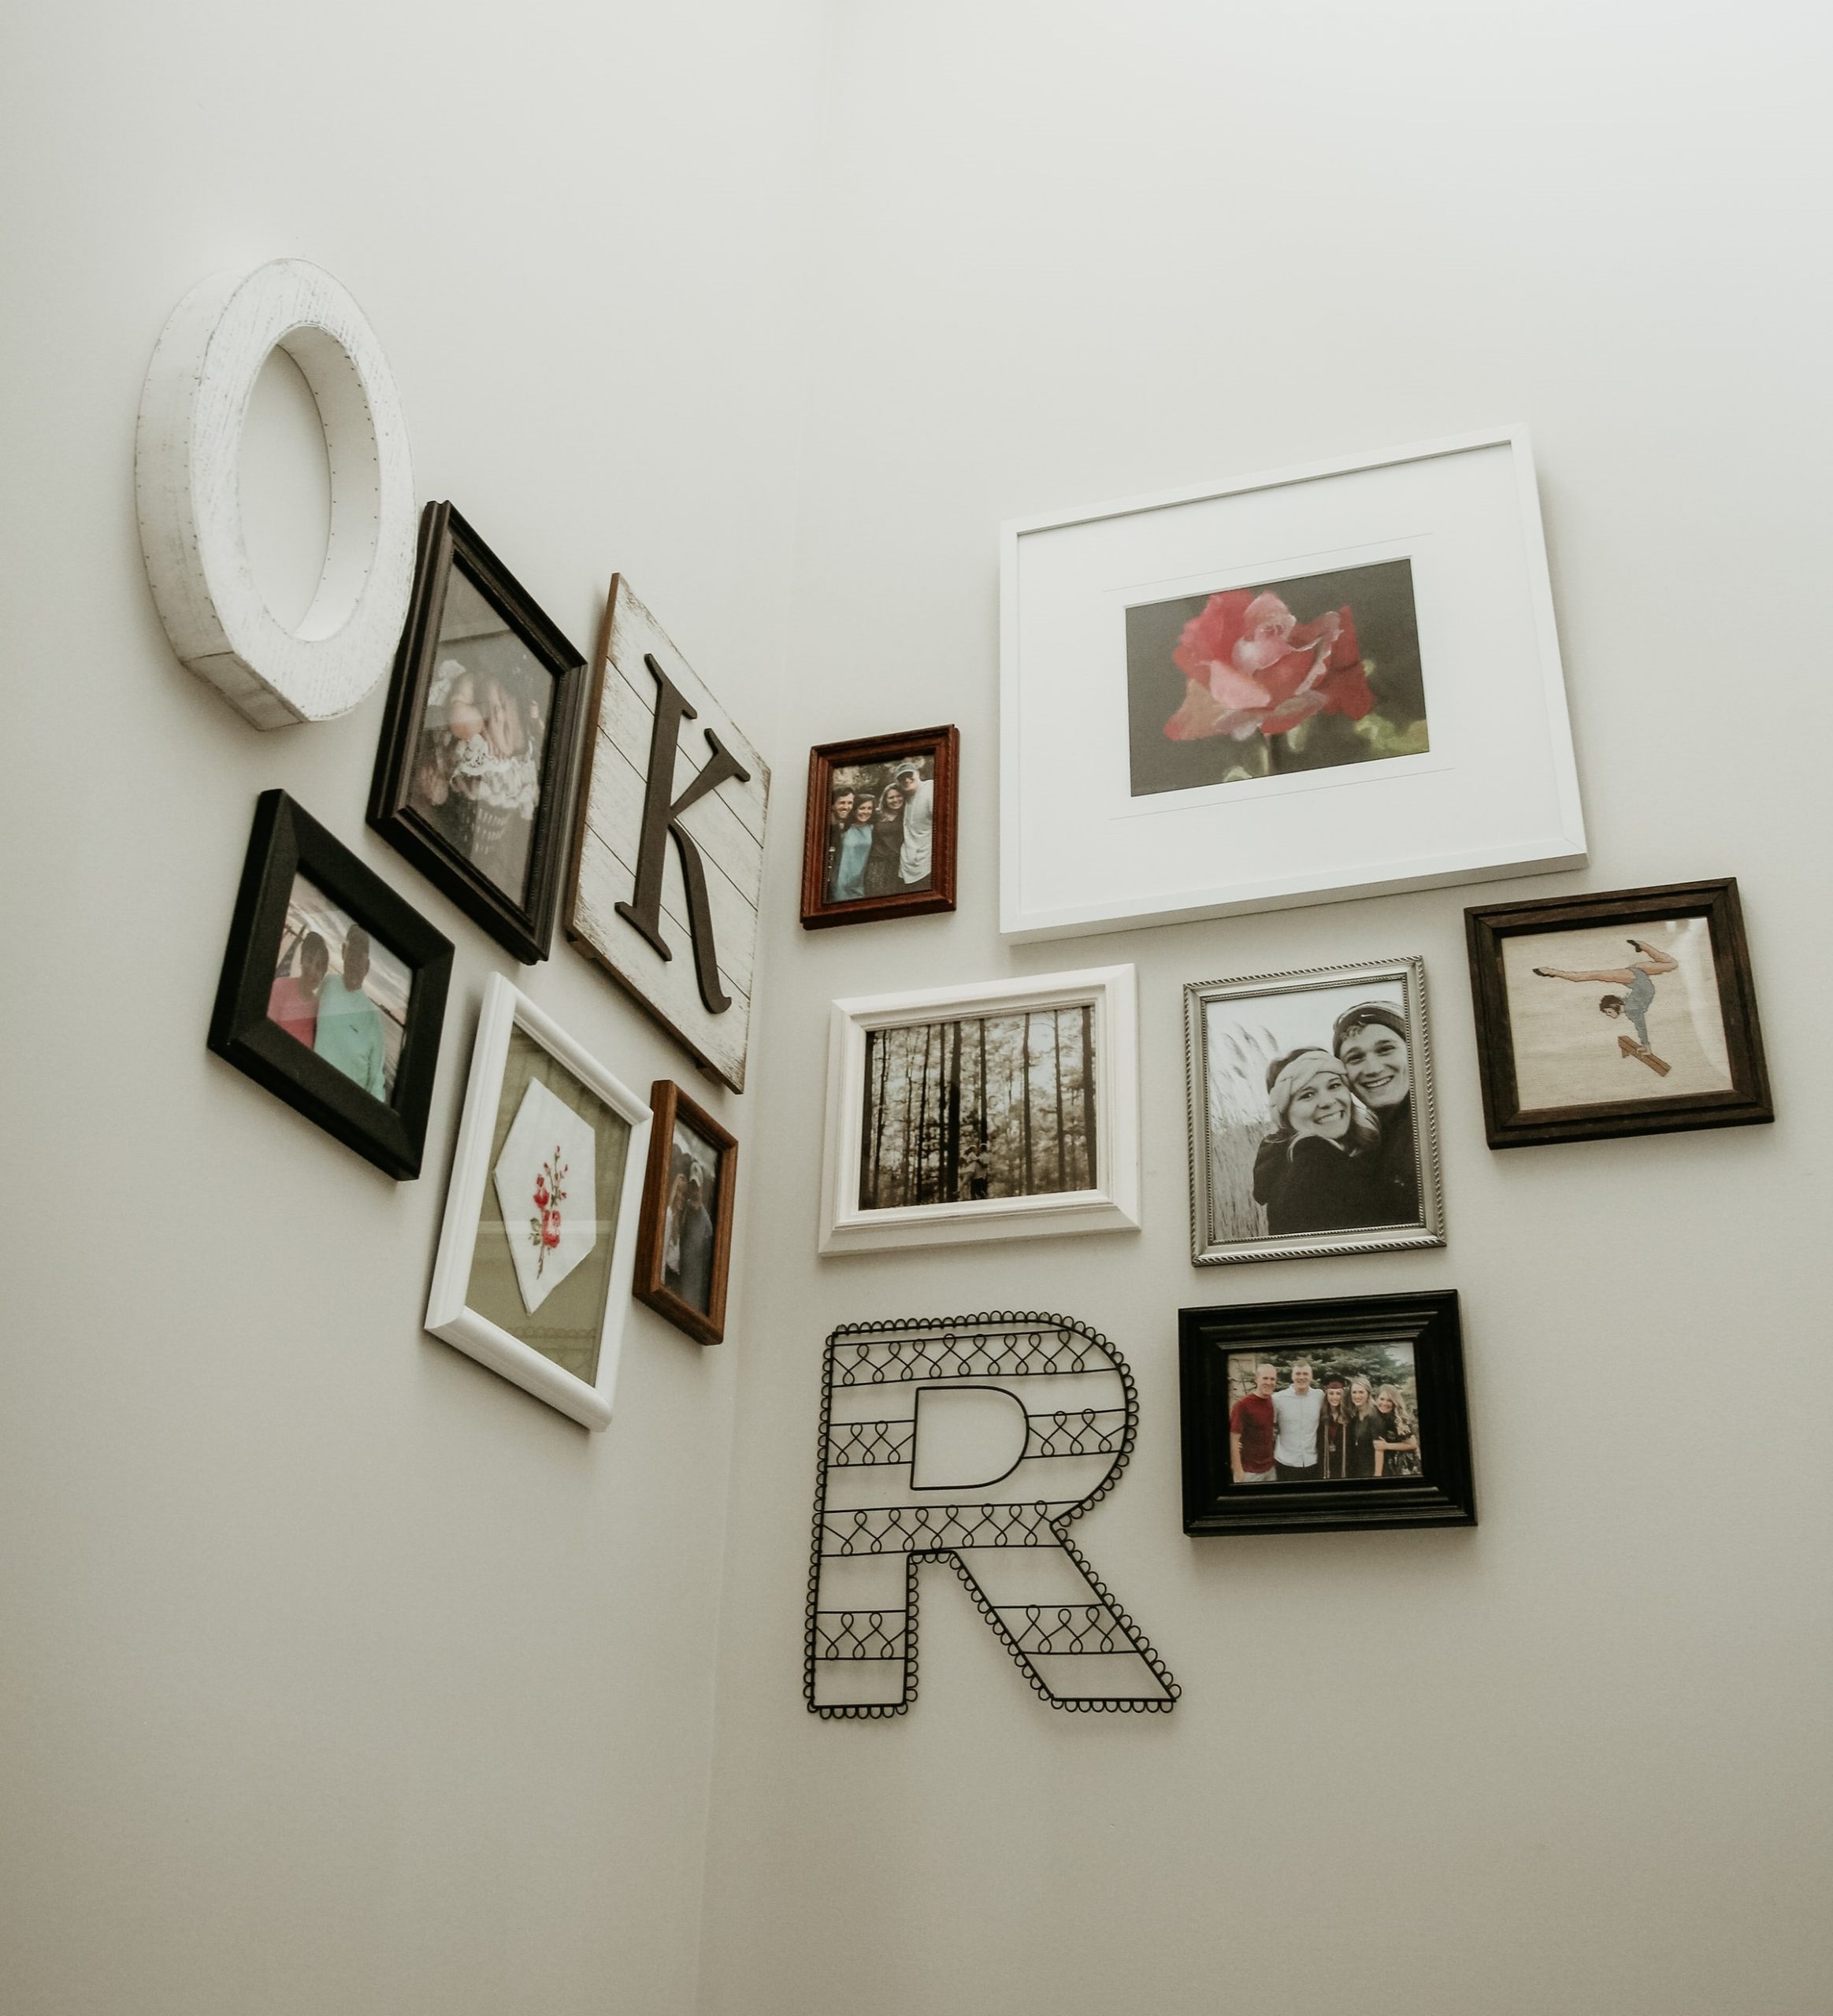 A gallery wall of custom framed photos at home